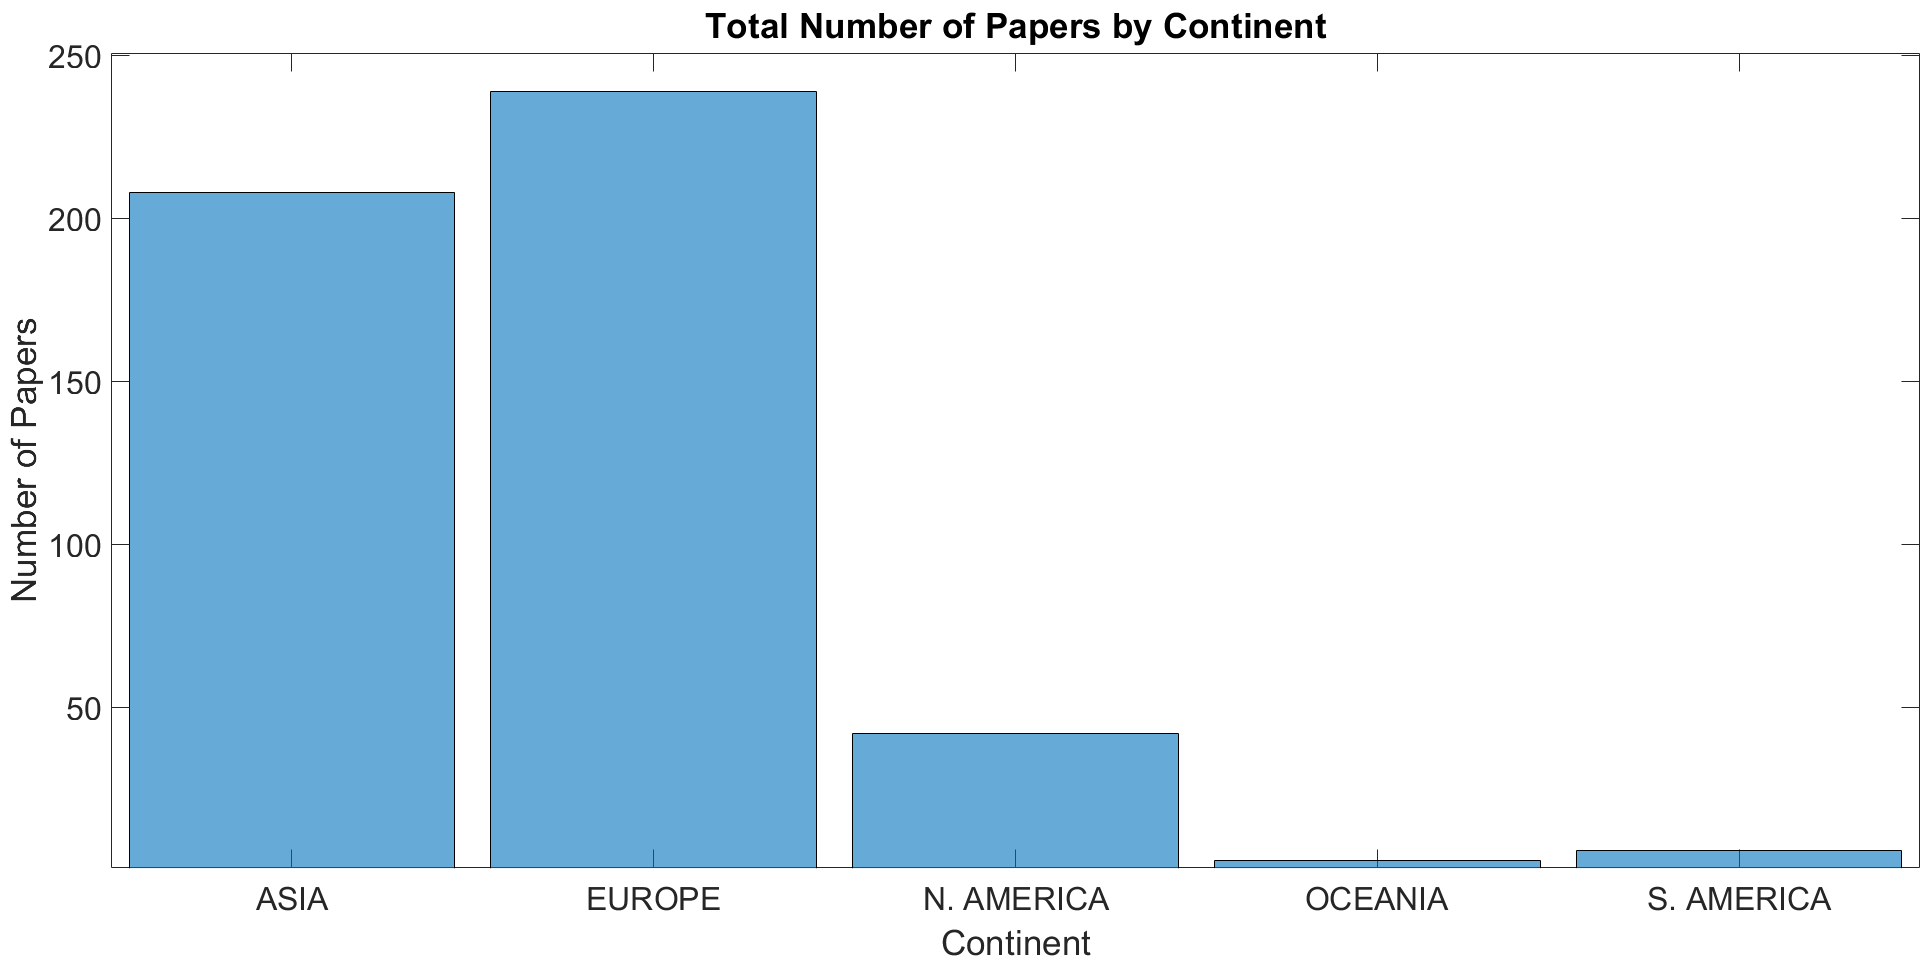 Fig. 1 - Total number of papers (by continent) presented in OCEANS 2019 Marseille.